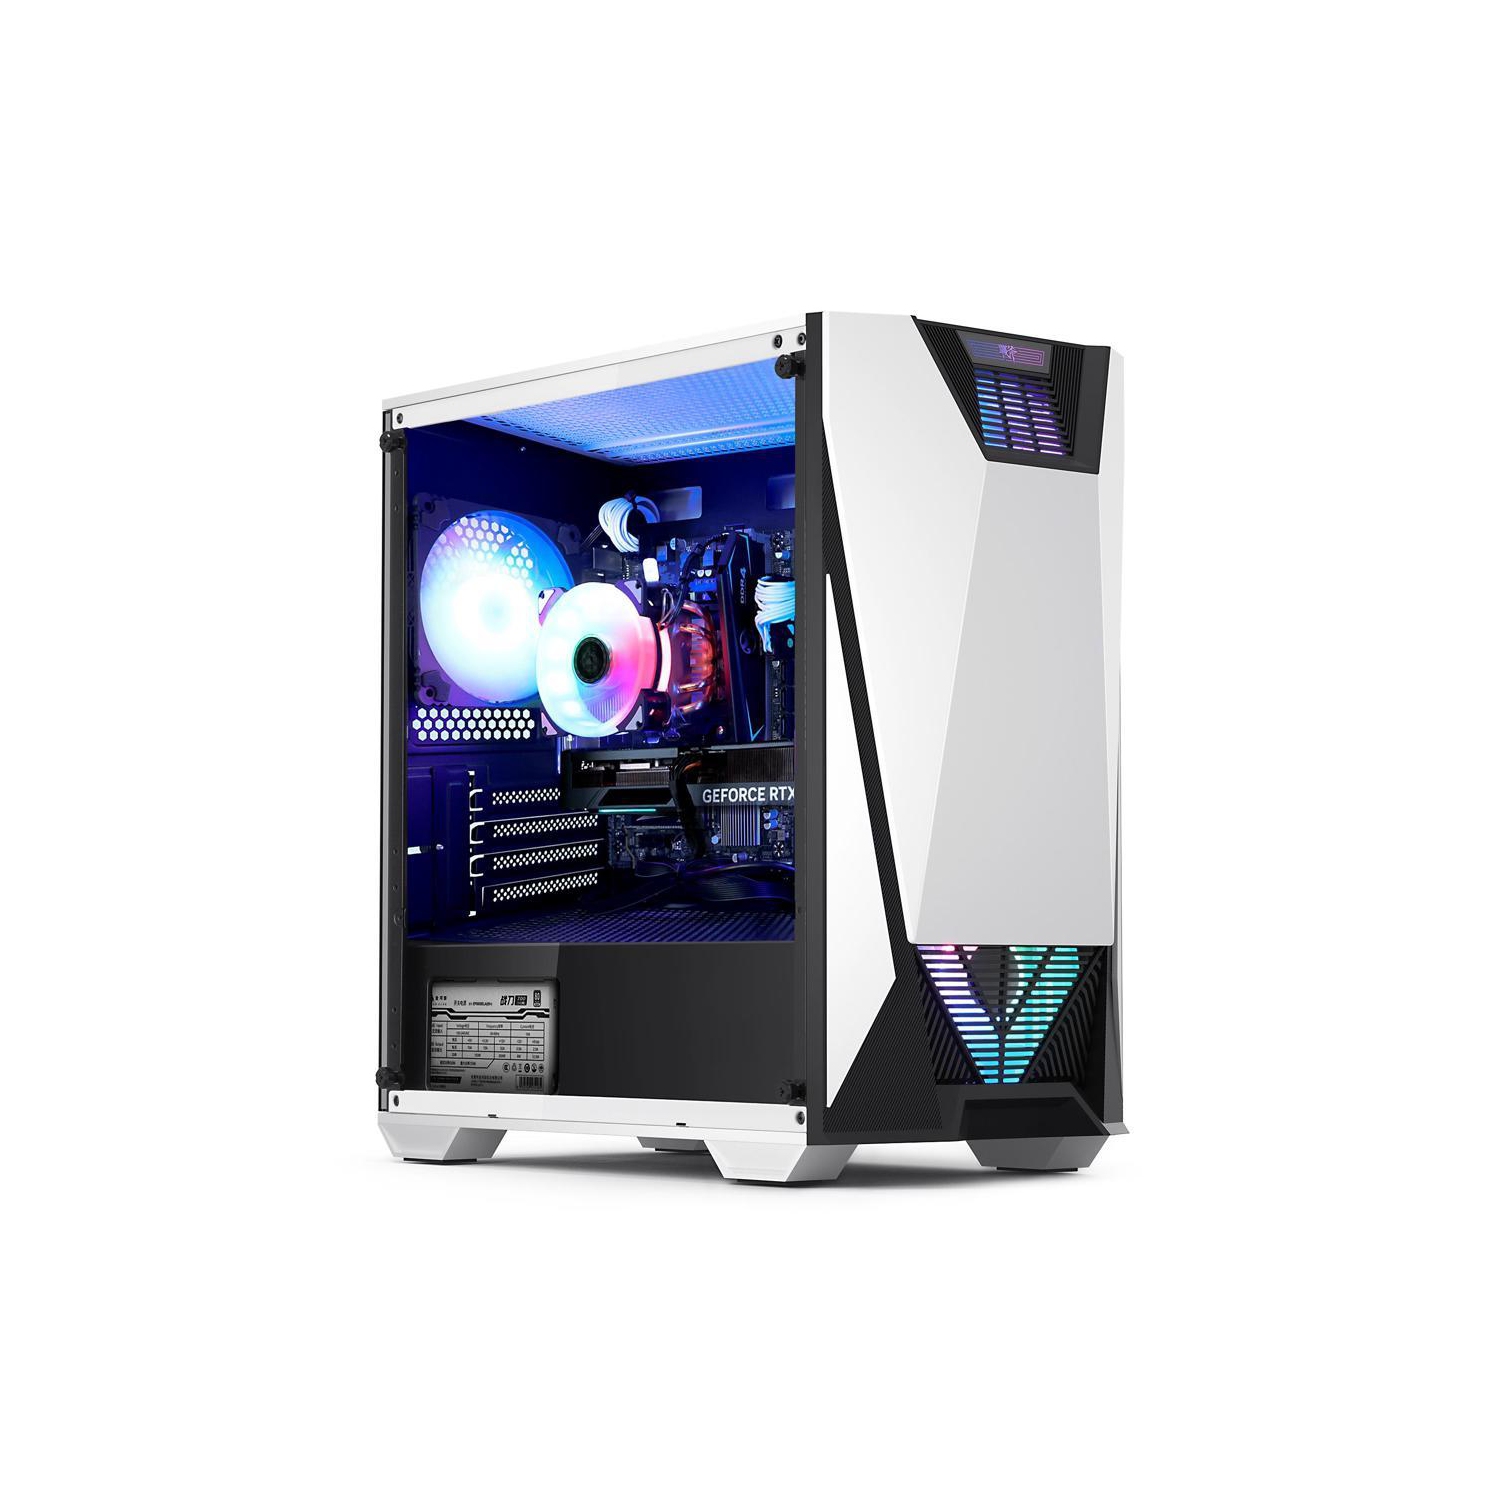 Hoengager Battleaxe Gaming - Intel Core i5-12400F 6-Core 2.5 GHz-NVIDIA GeForce RTX 3060 Ti- 16GB DDR4 3200MHz - 2TB+500GB M.2 NVMe SSD- WIFI -RGB Fans - Windows 11 Pro Computer